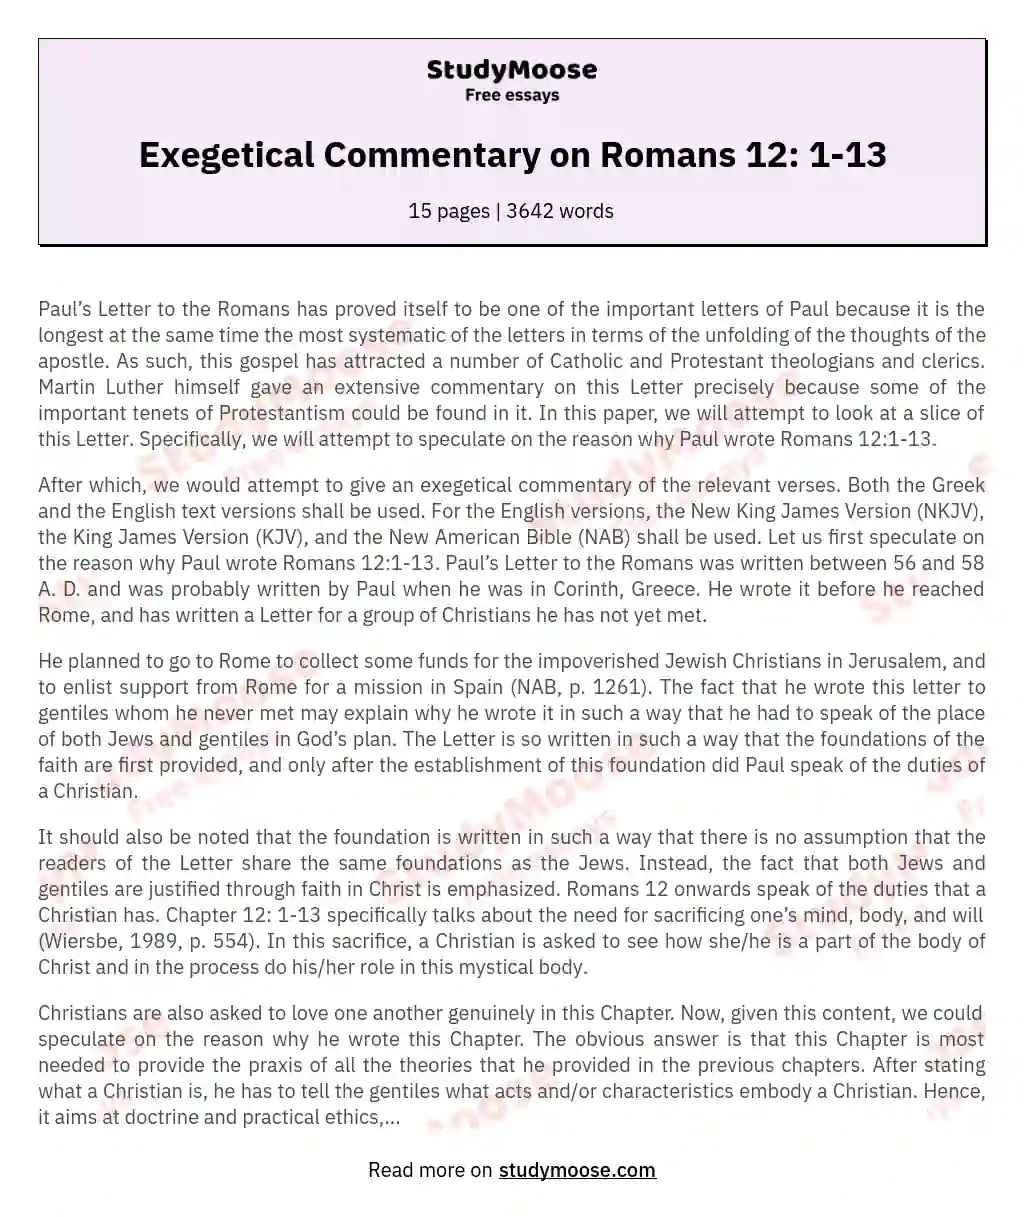 Exegetical Commentary on Romans 12: 1-13